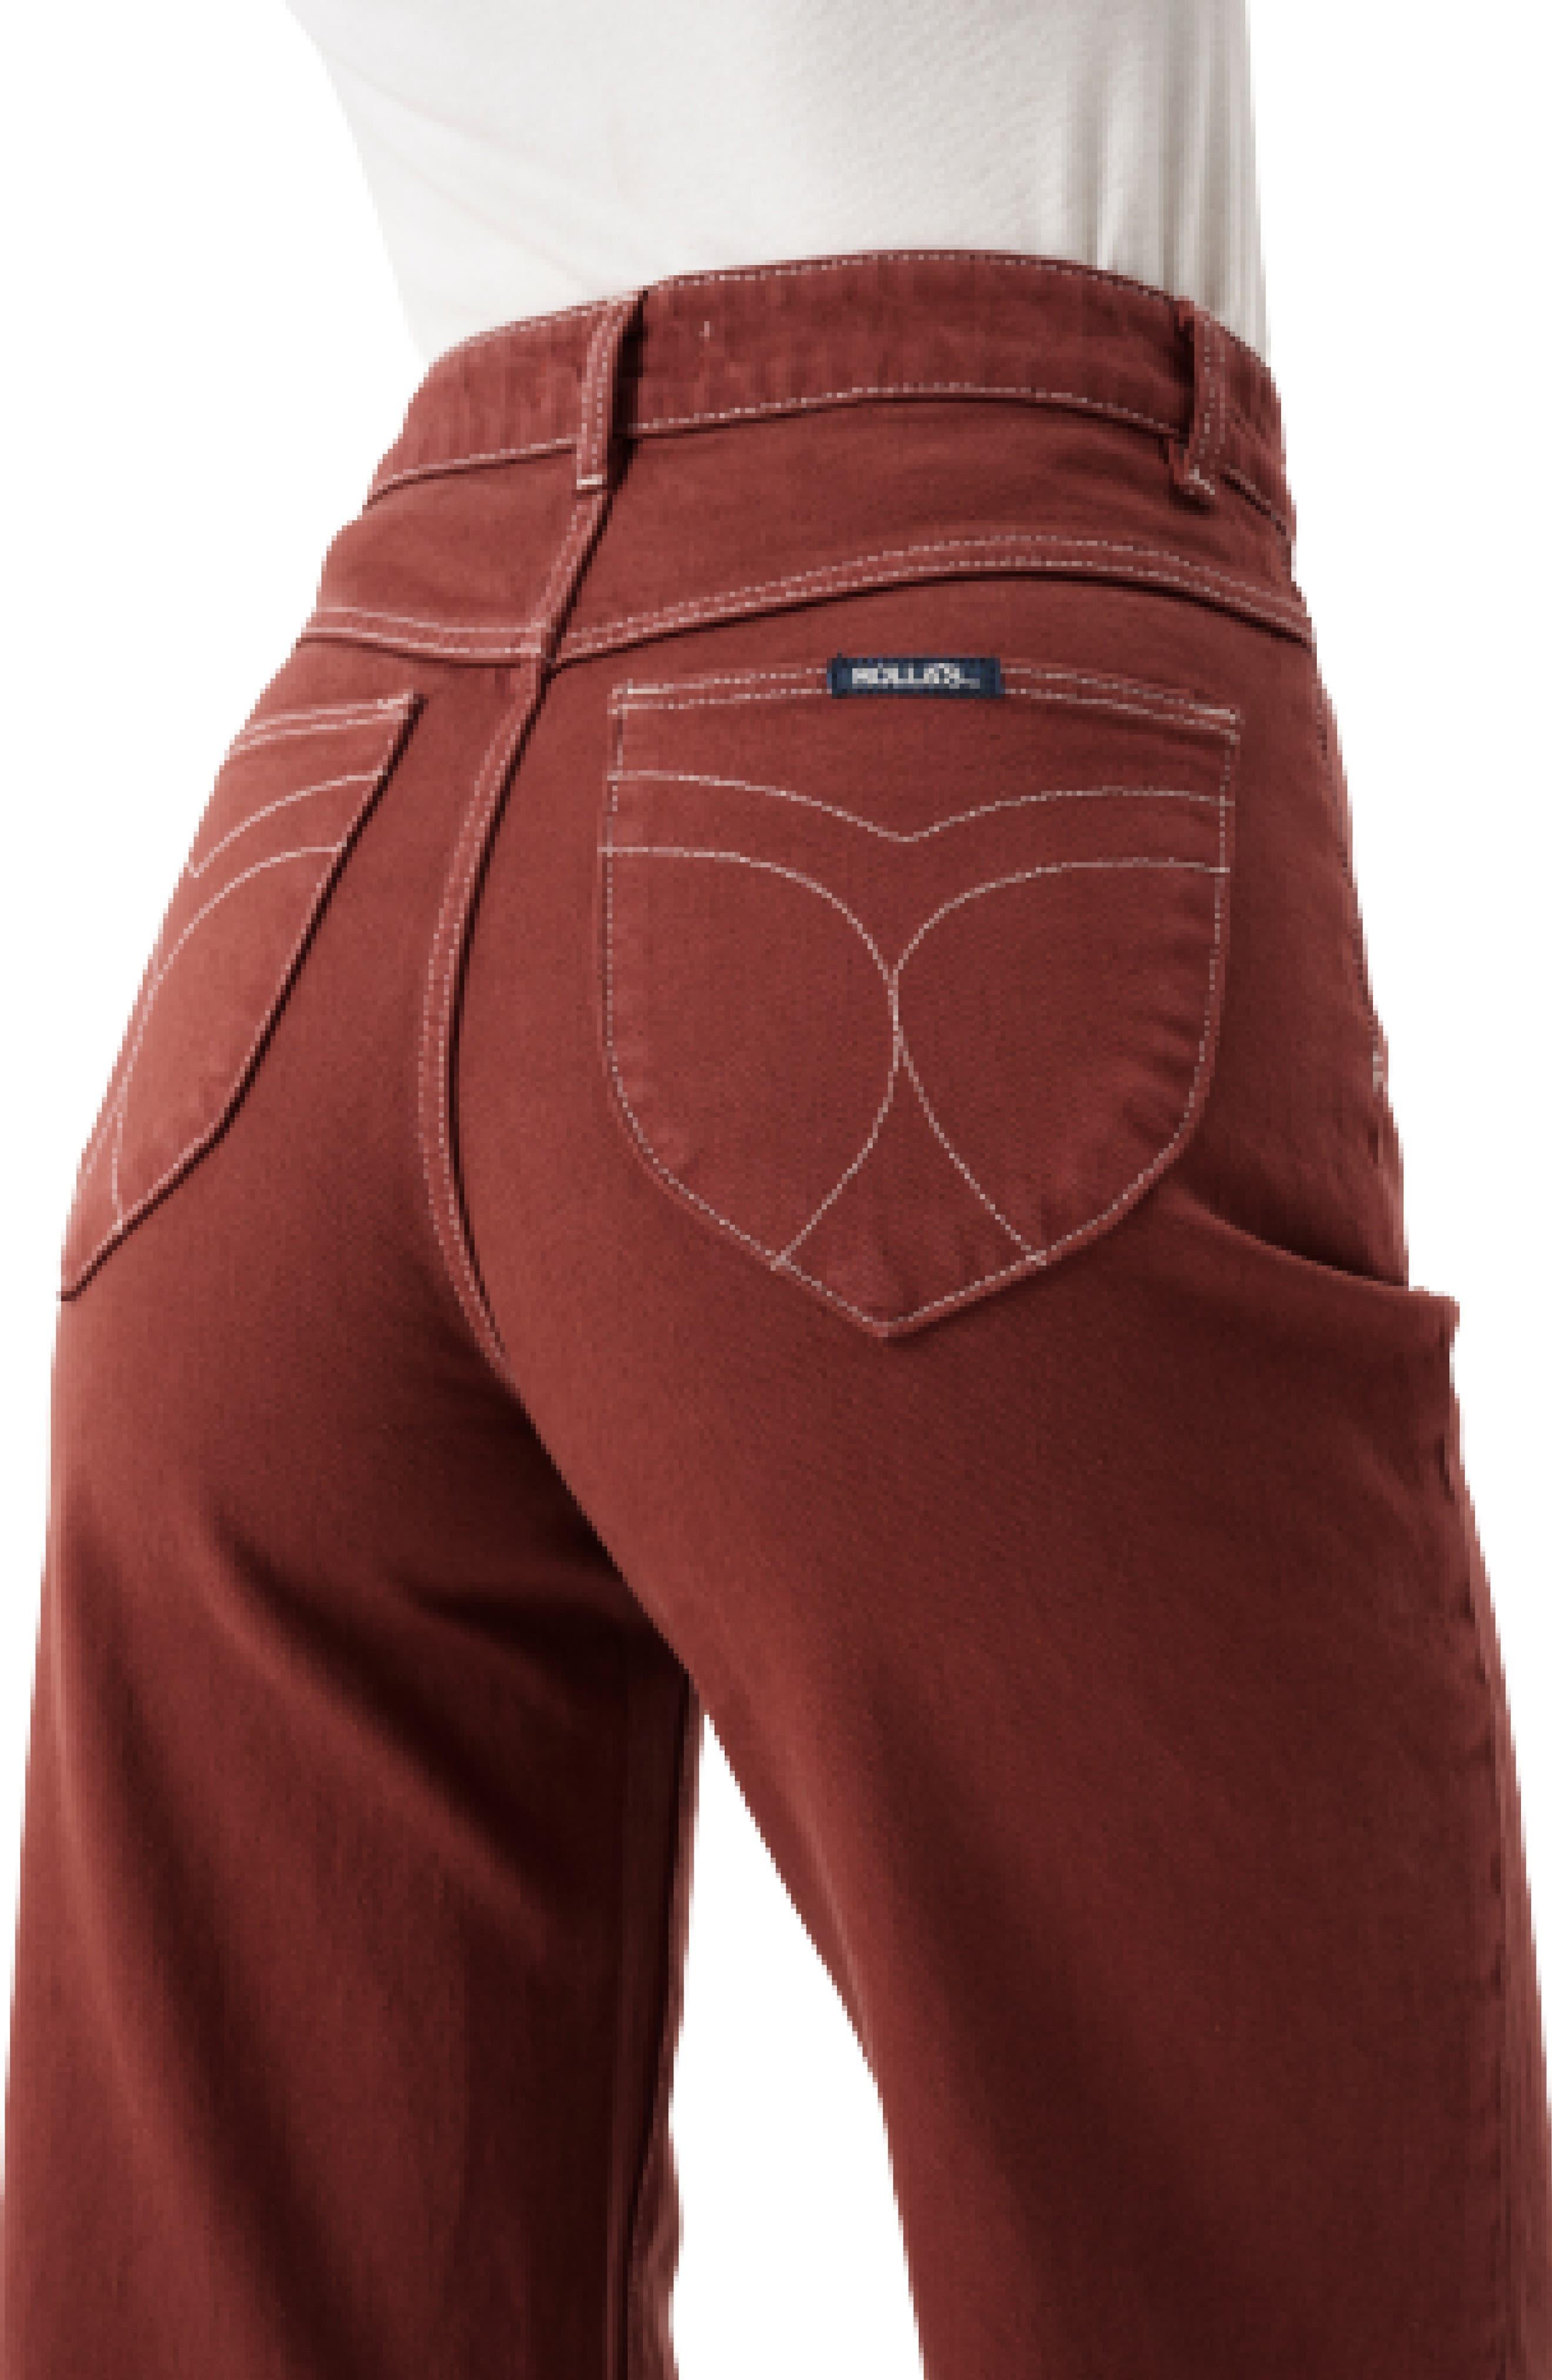 Rolla's Sailor Jean in Red